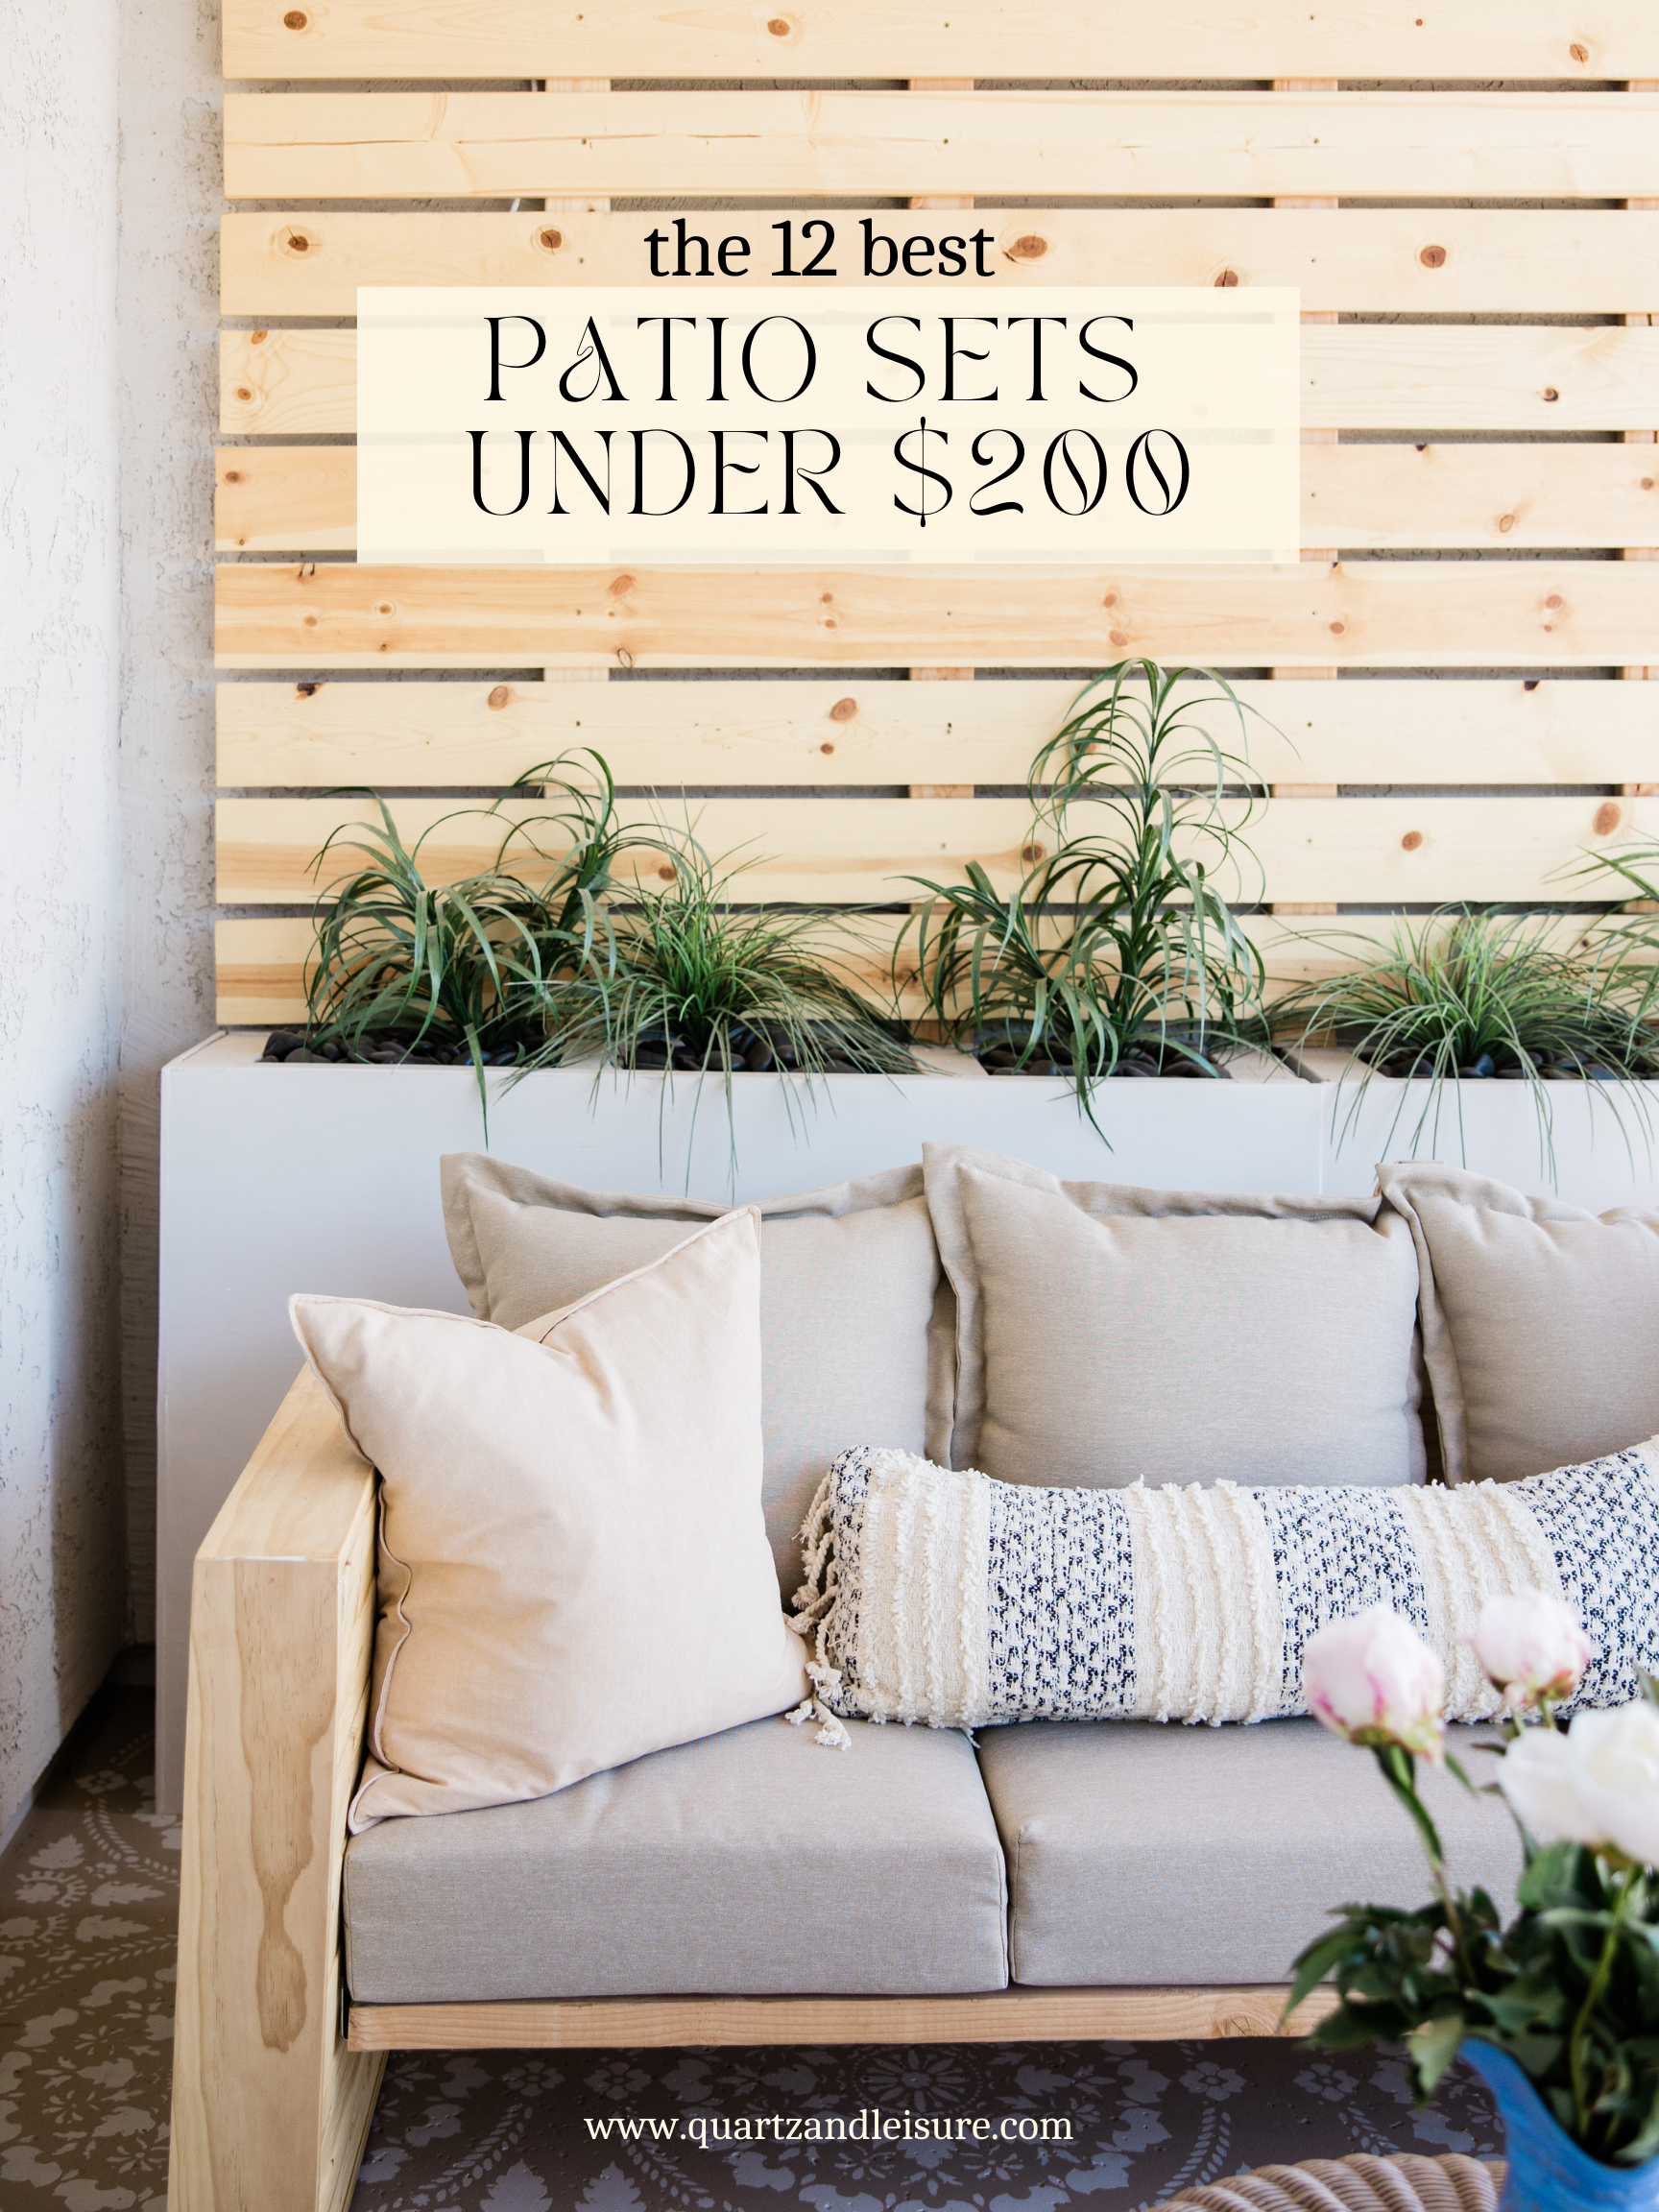 The Best Patio Sets Under $200